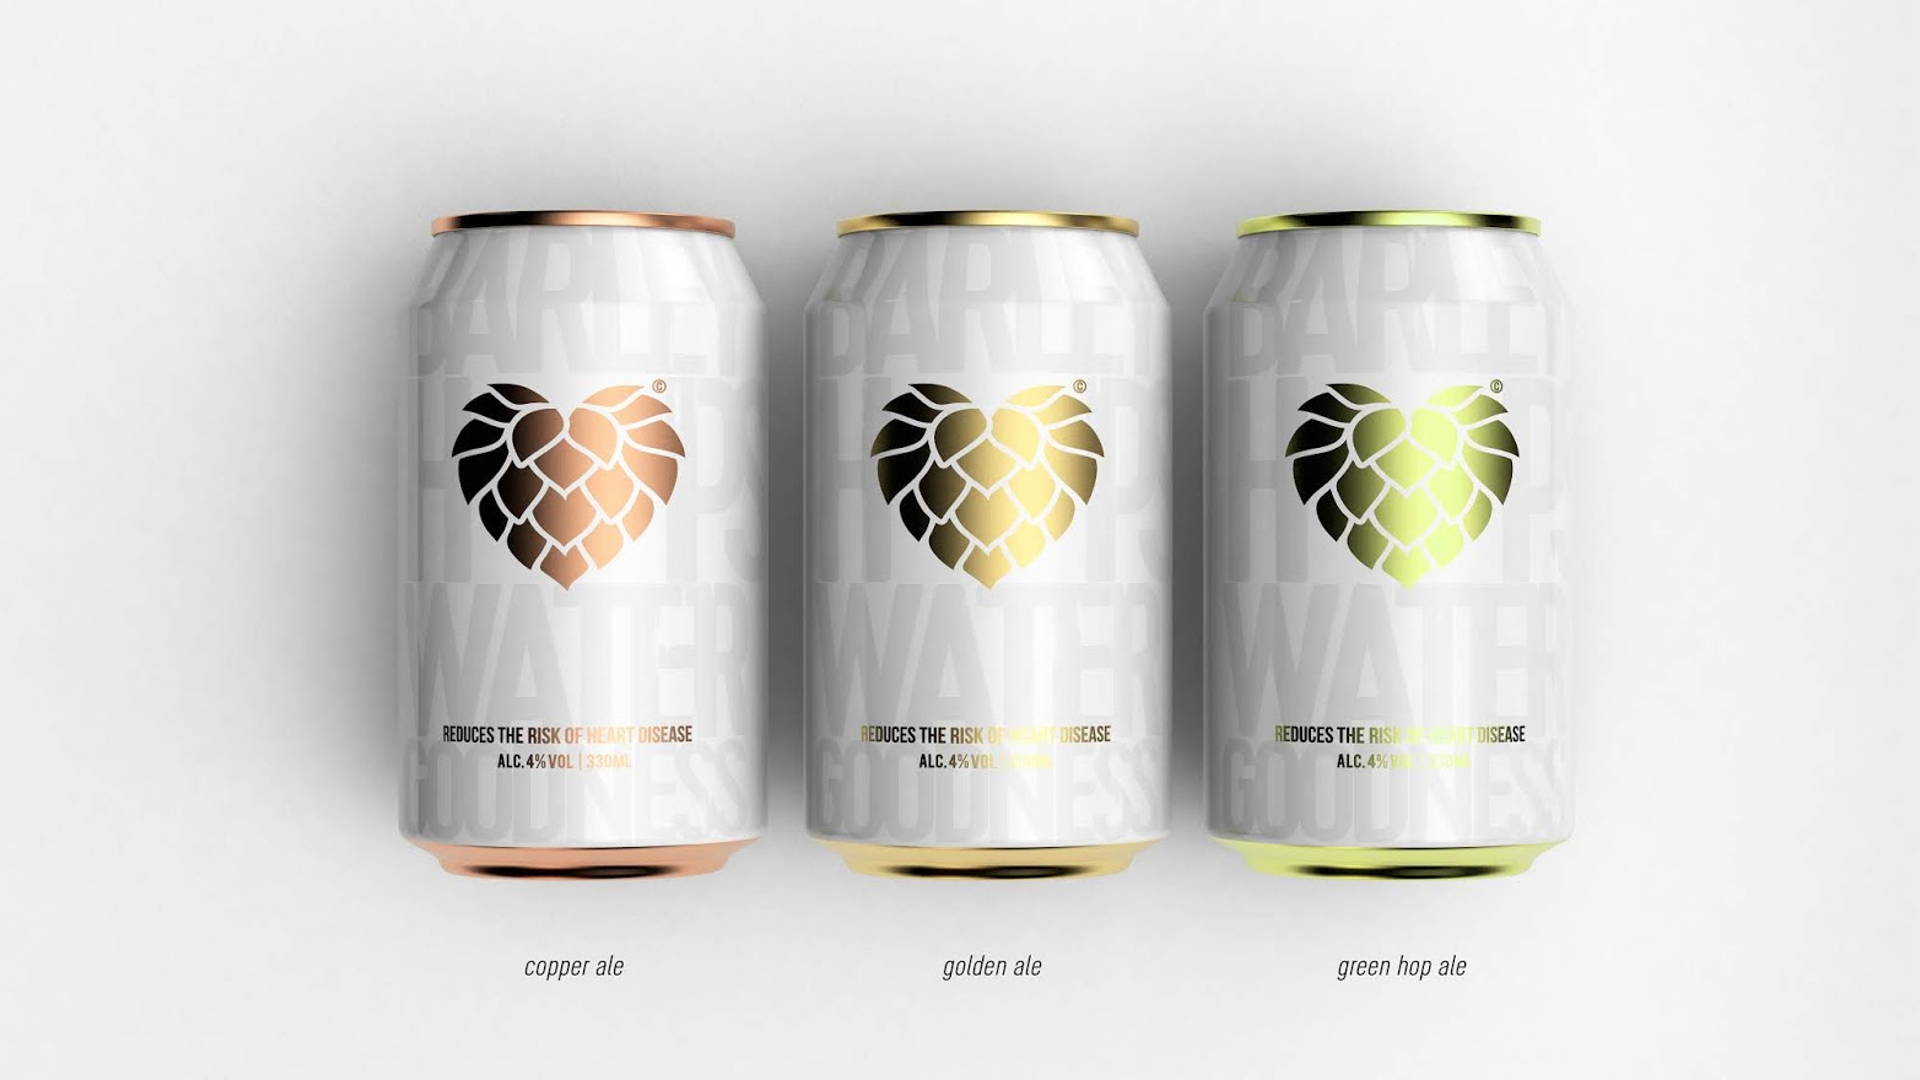 Featured image for PB Creative Designs "Healthy" Beer